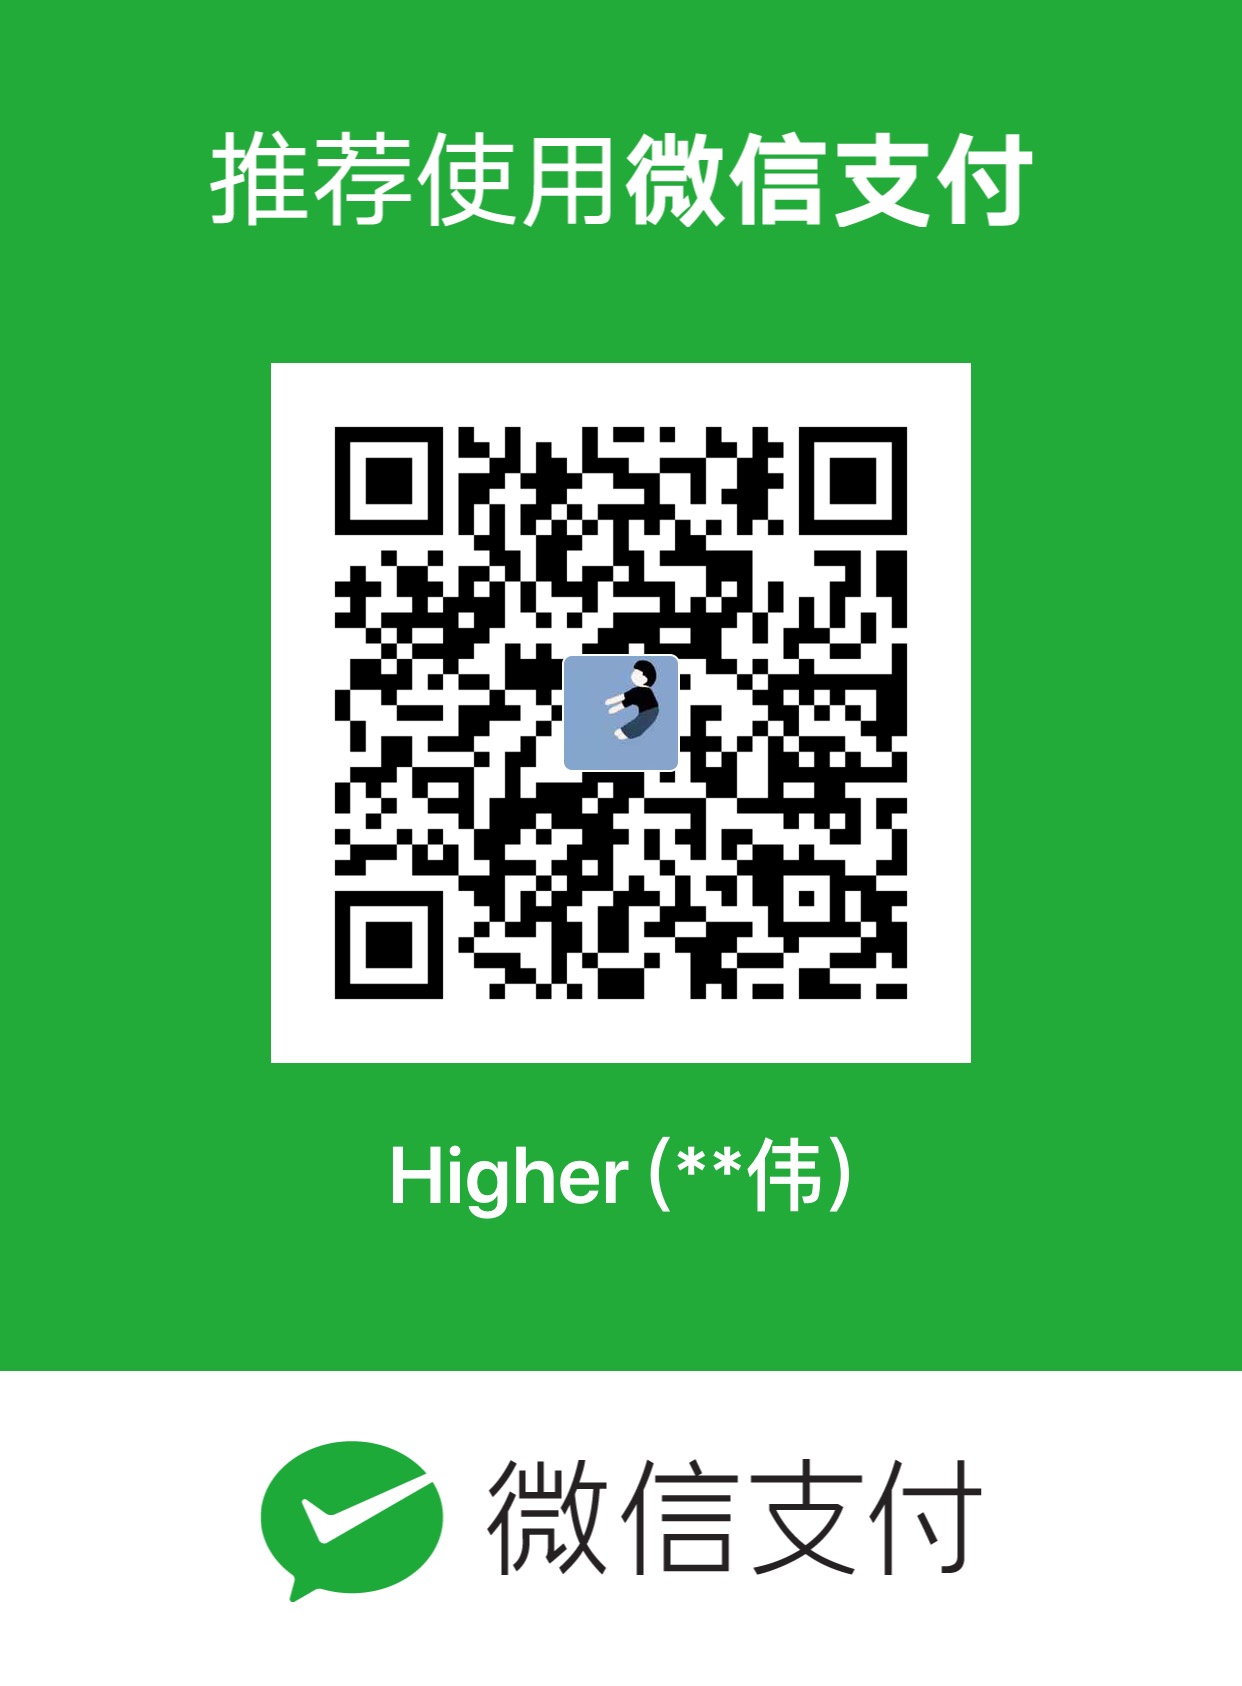 Highter WeChat Pay